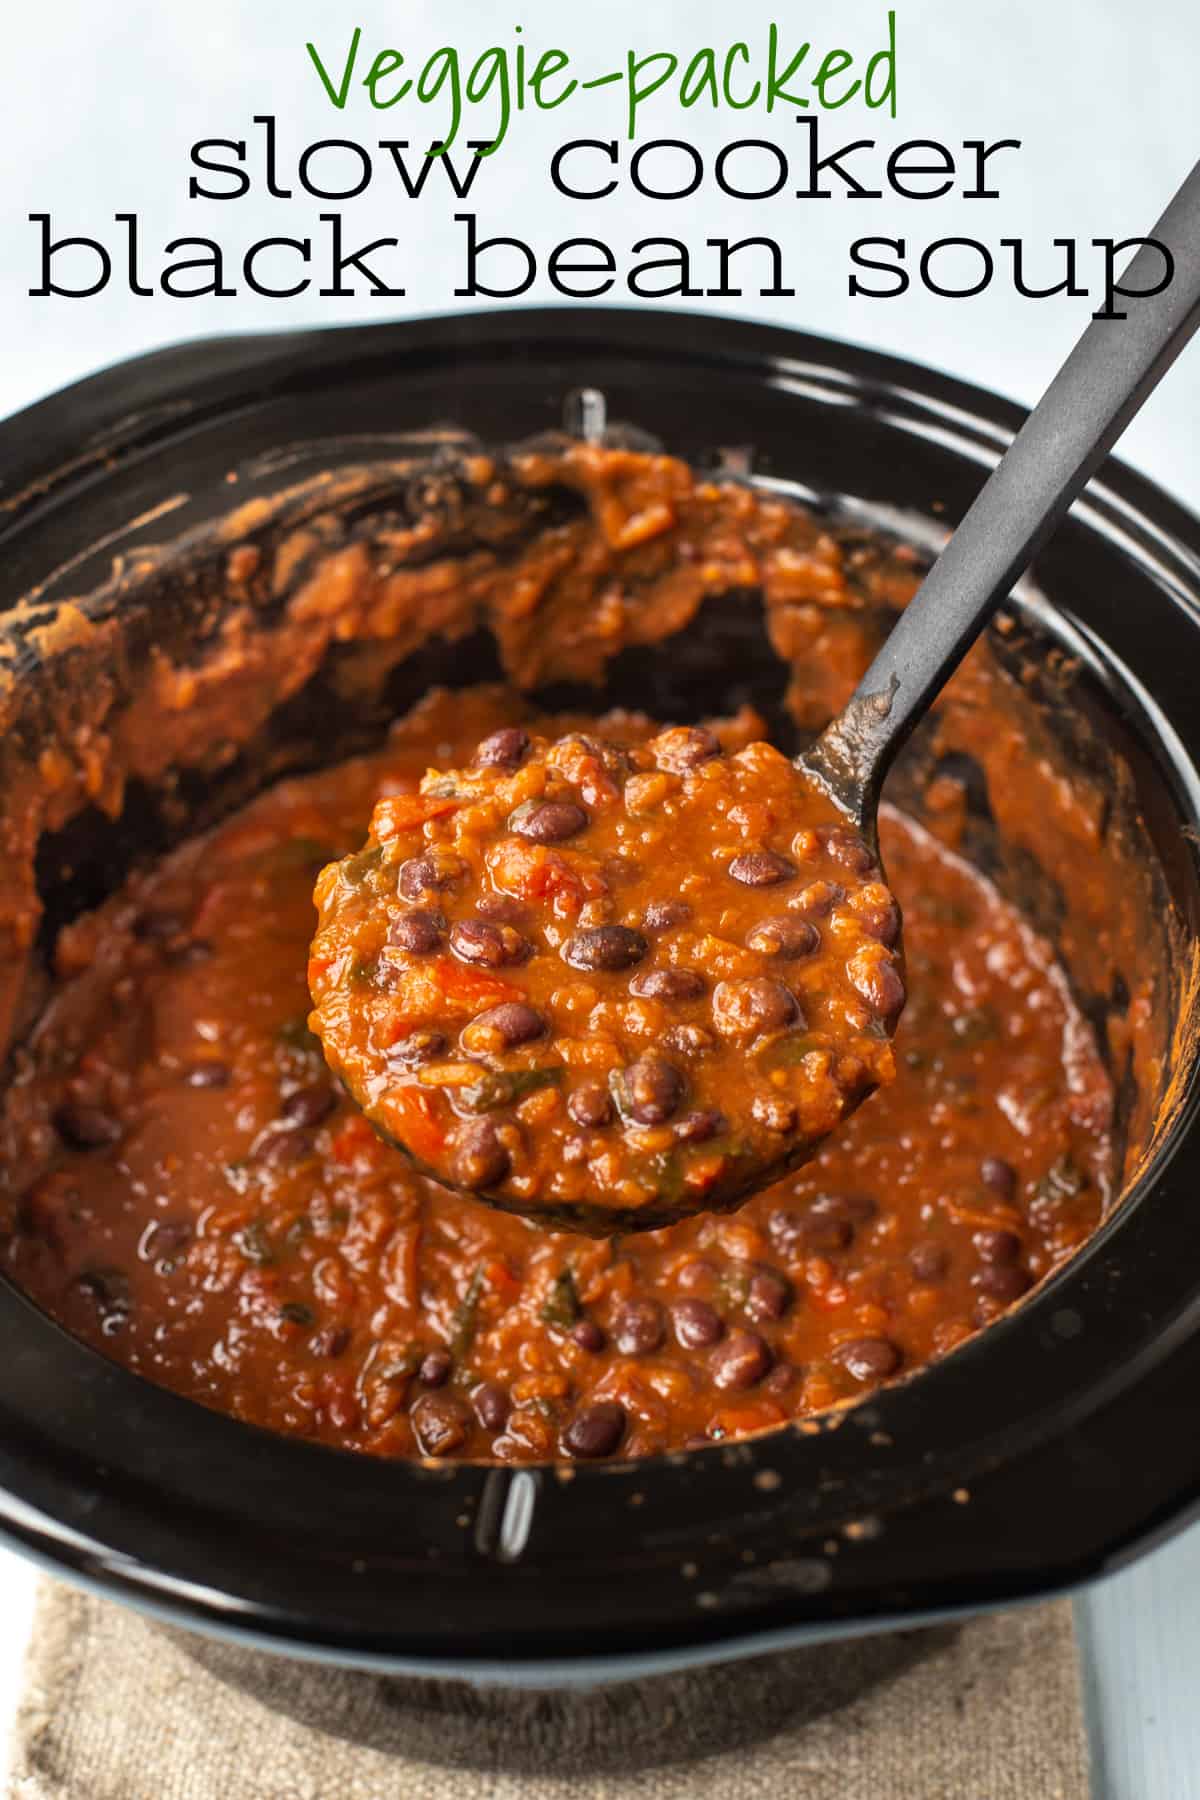 A ladle taking a scoop of black bean soup from a slow cooker.